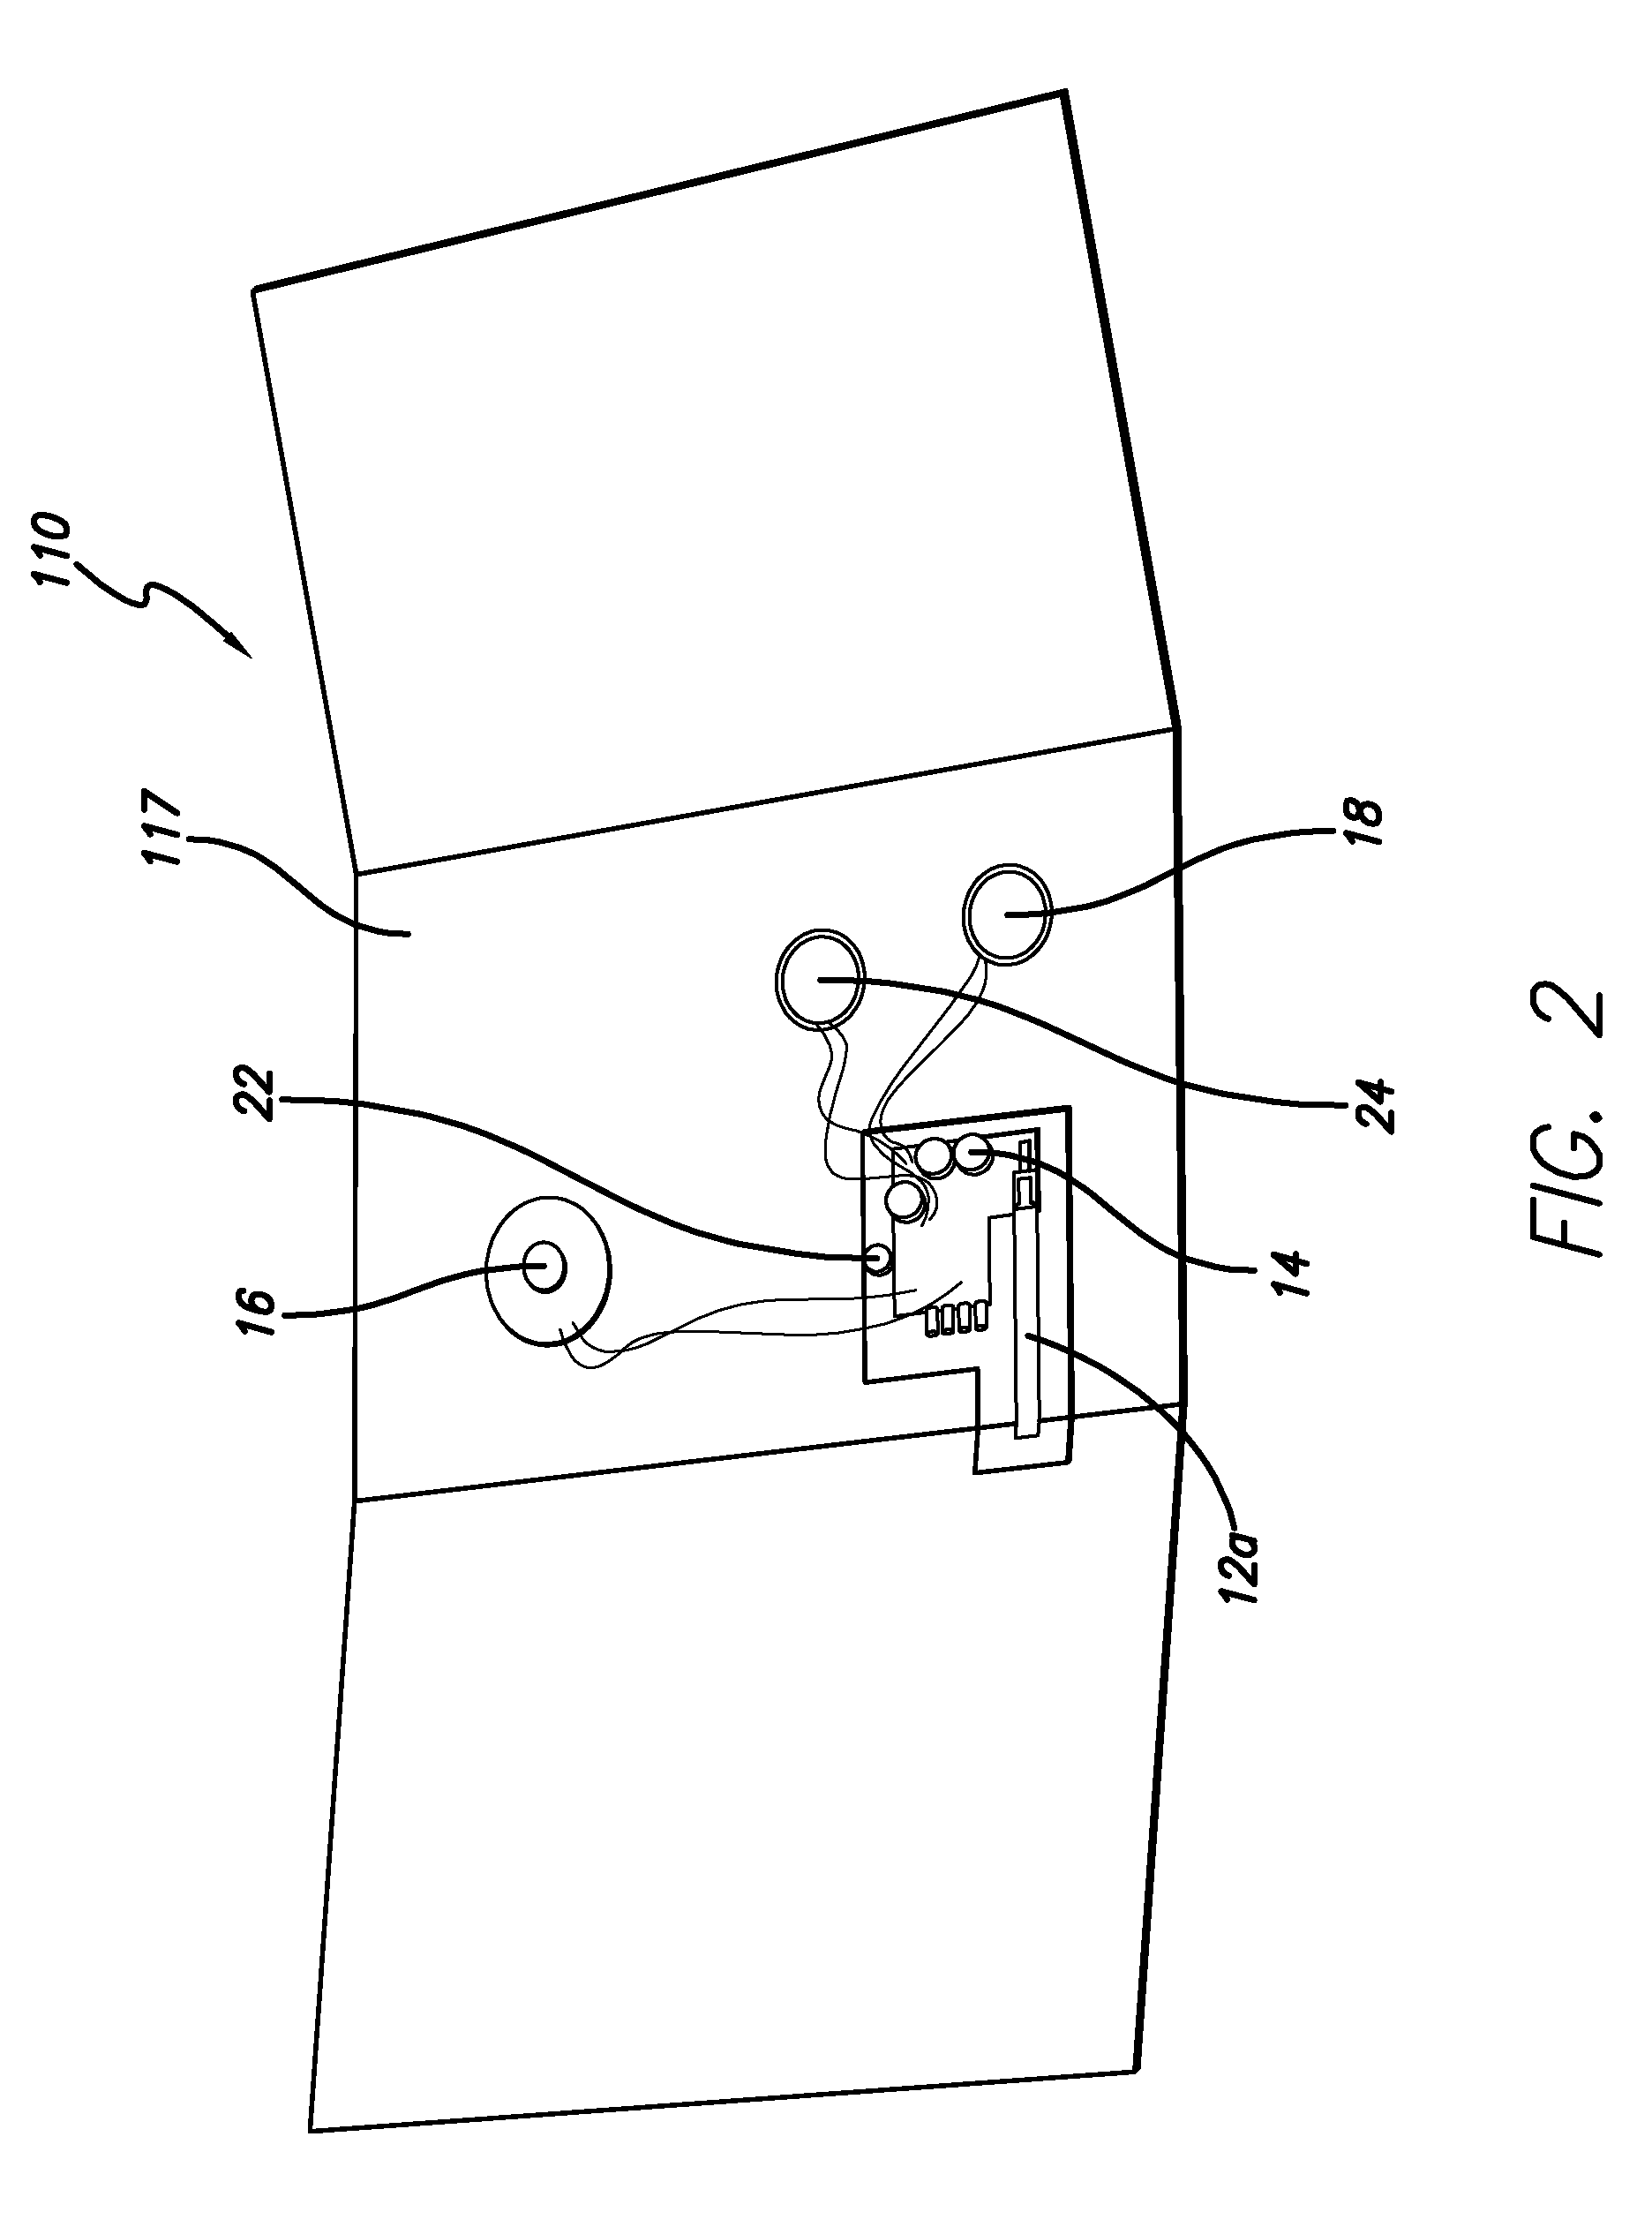 Novelty video device and method